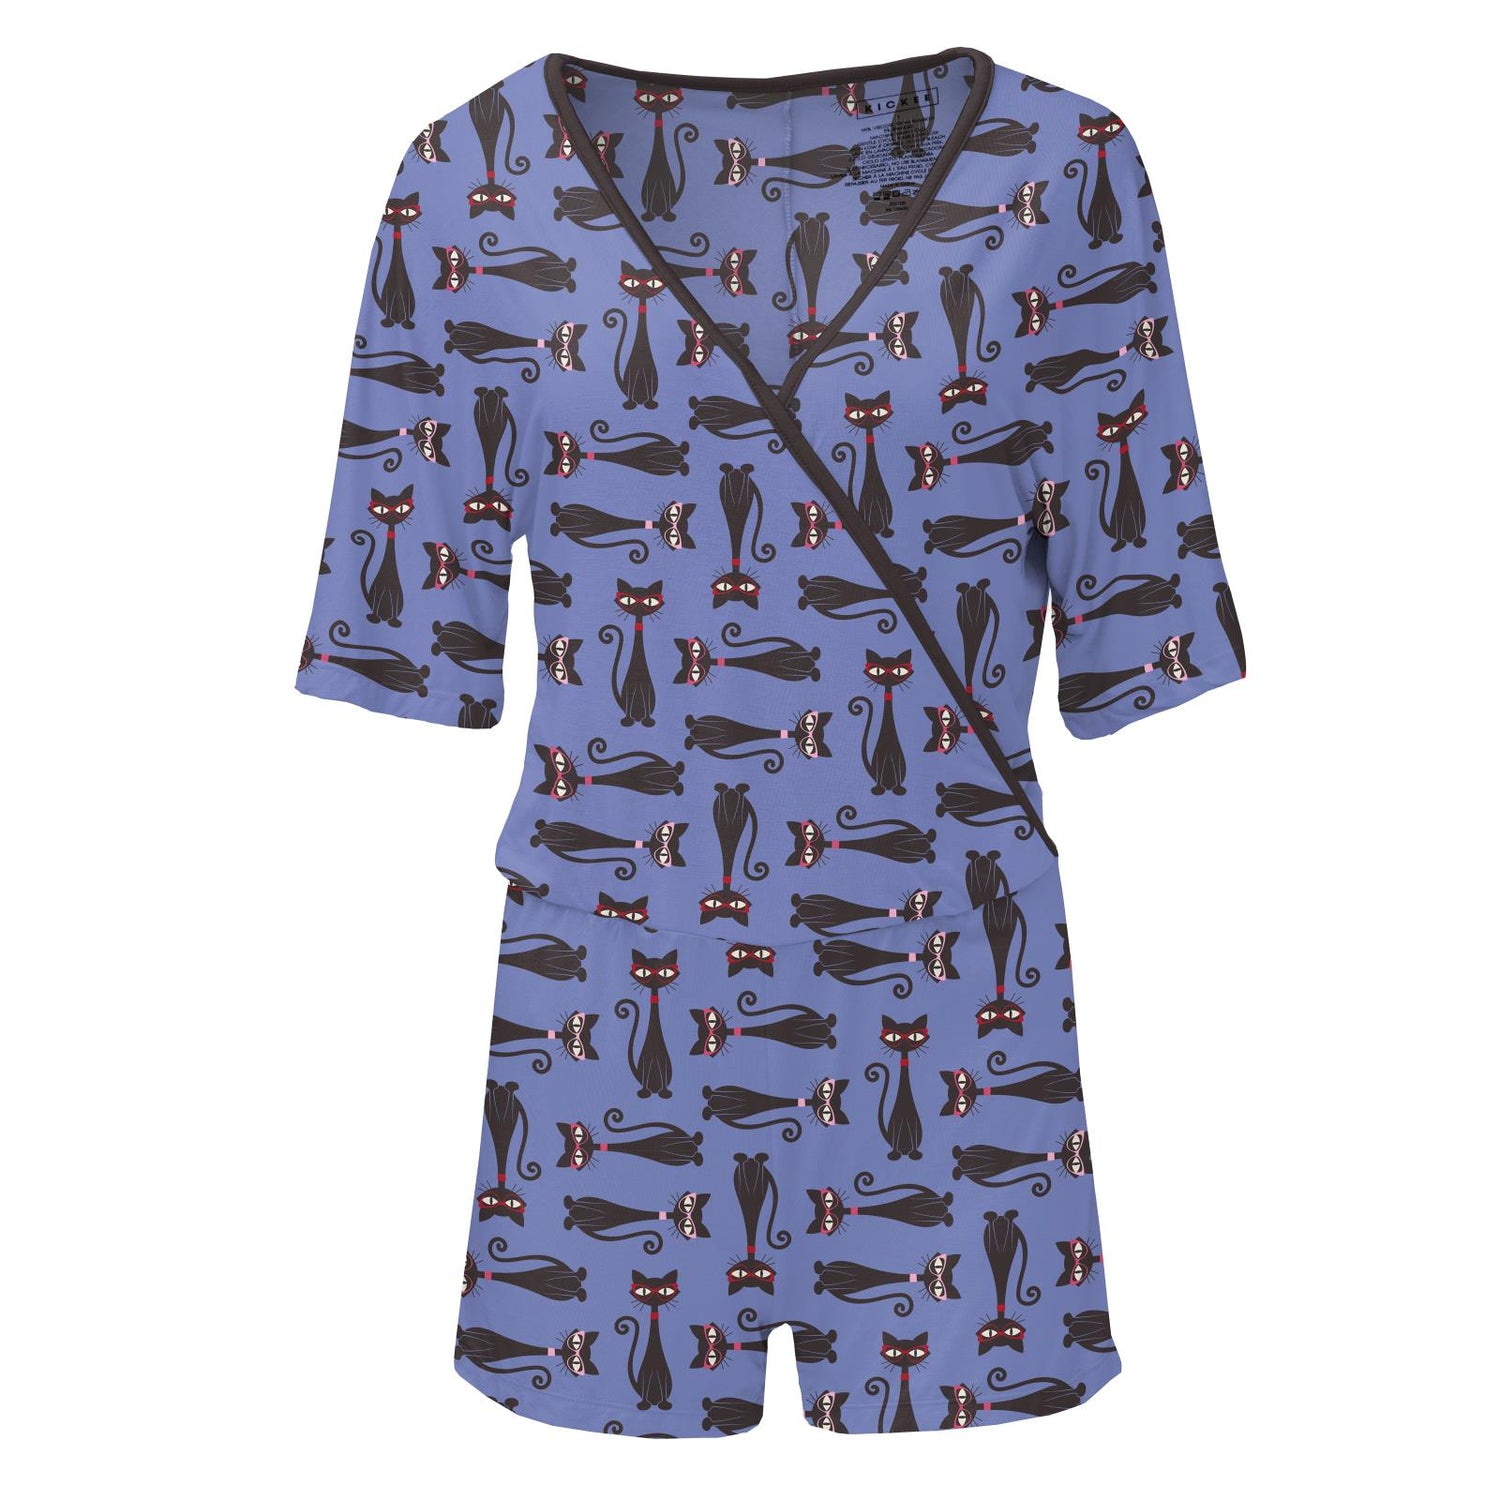 Women's Print Kimono Romper in Forget Me Not Cool Cats